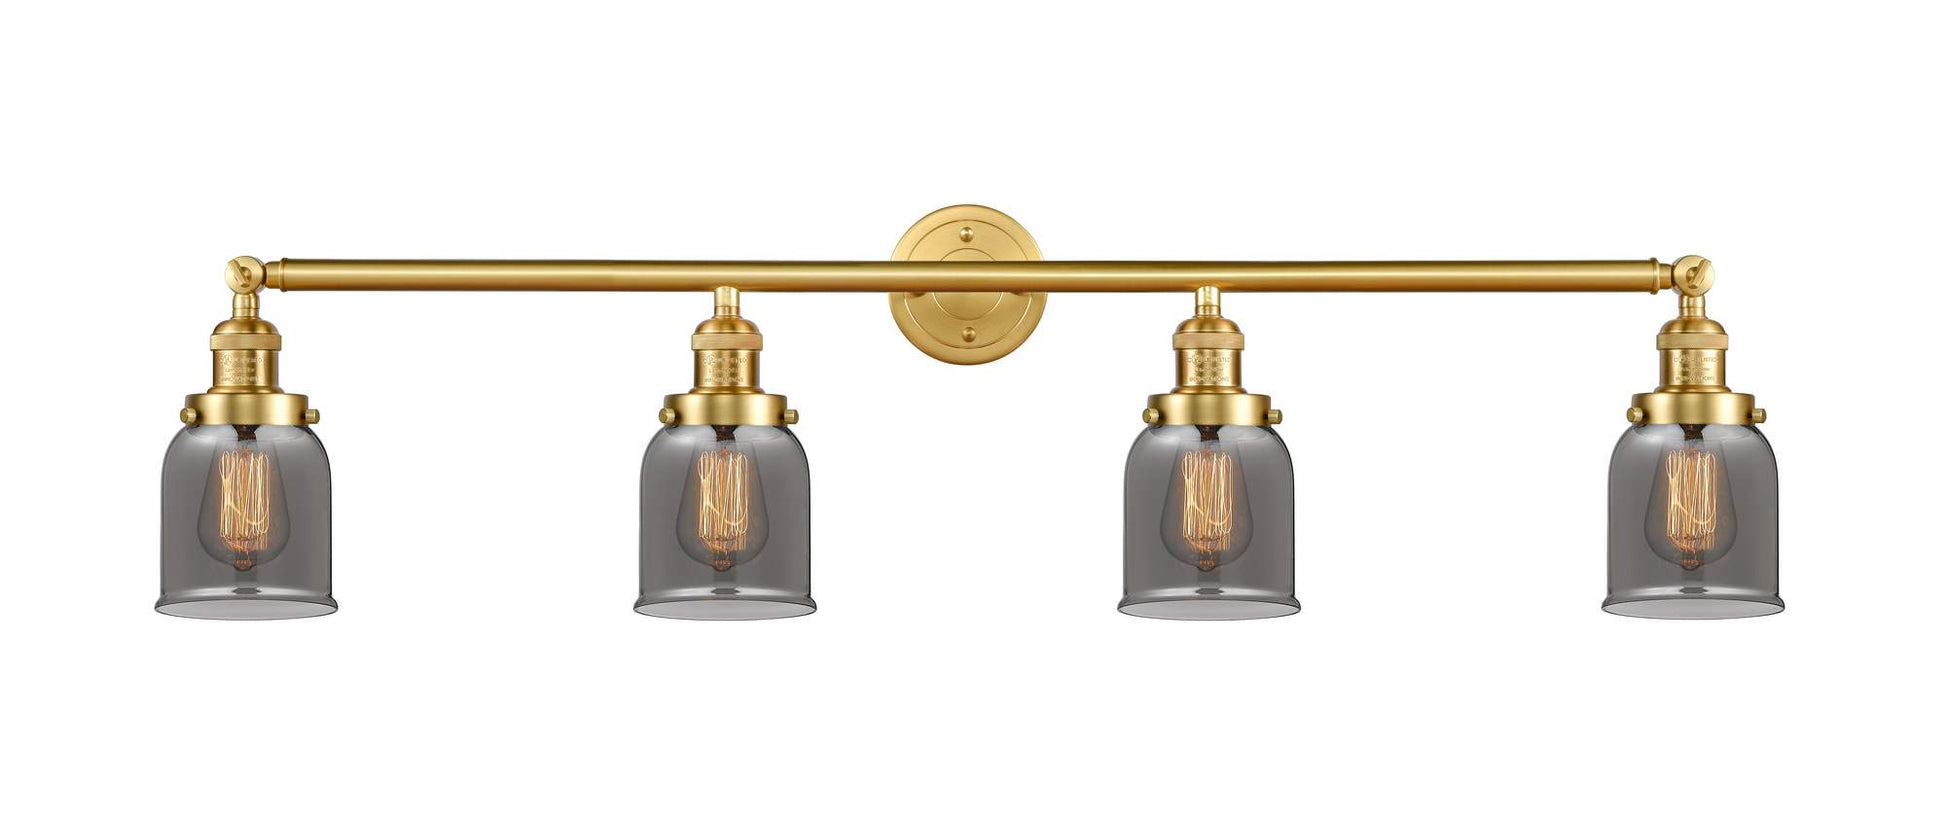 215-SG-G53 4-Light 42" Satin Gold Bath Vanity Light - Plated Smoke Small Bell Glass - LED Bulb - Dimmensions: 42 x 7 x 9.75 - Glass Up or Down: Yes